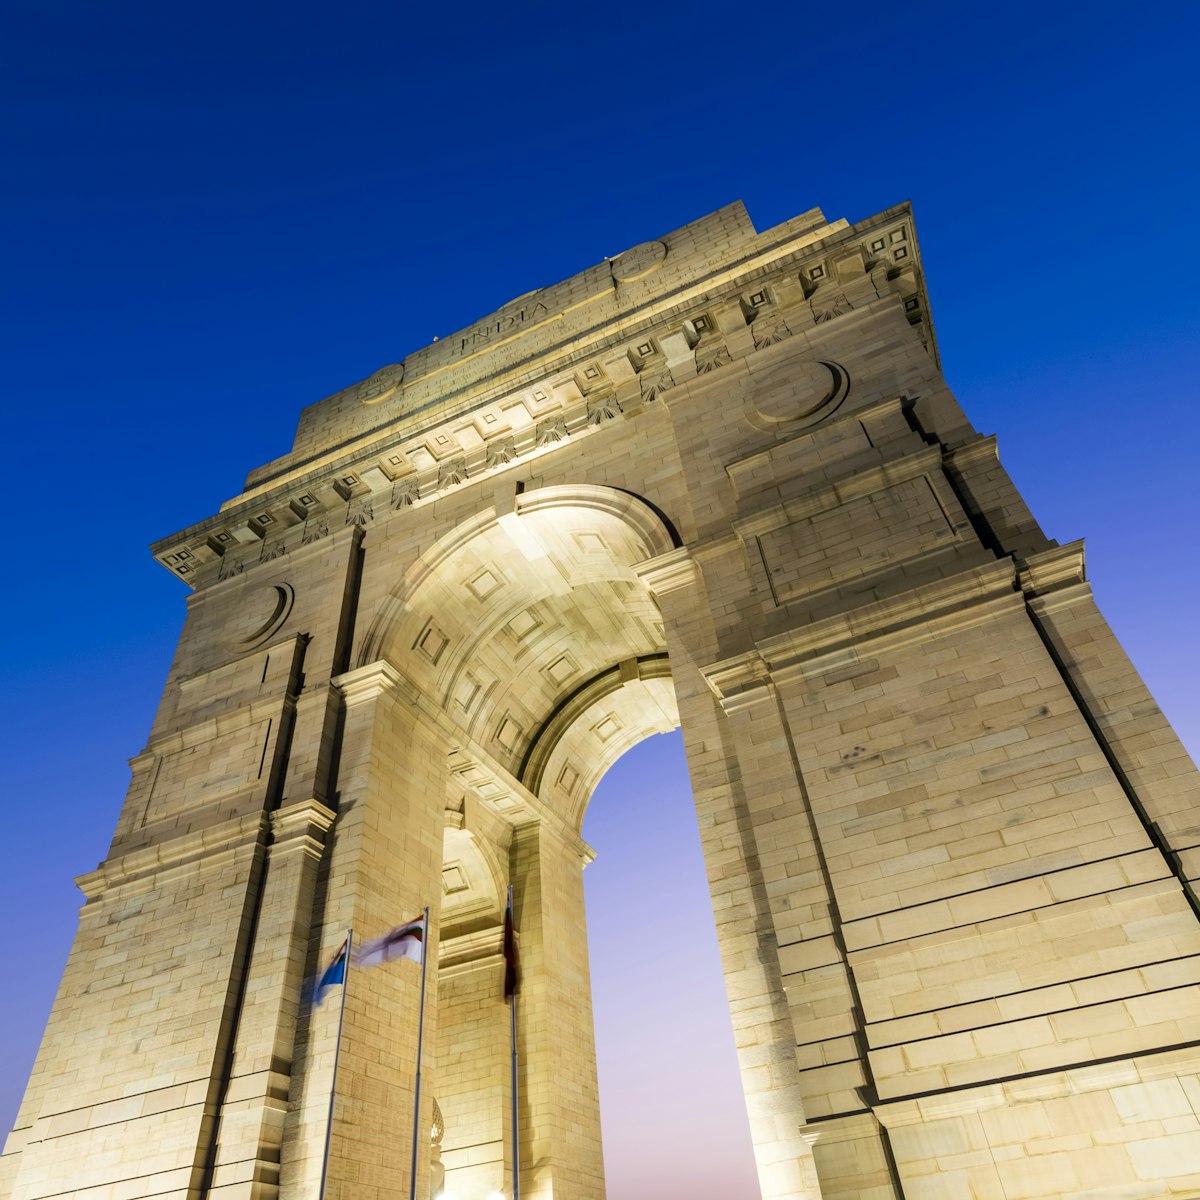 A wide angle shot of the India Gate (formerly known as the All India War Memorial) at Rajpath, New Delhi.; Shutterstock ID 325788497; Your name (First / Last): Josh Vogel; GL account no.: 56530; Netsuite department name: Online Design; Full Product or Project name including edition: Digital Content/Sights